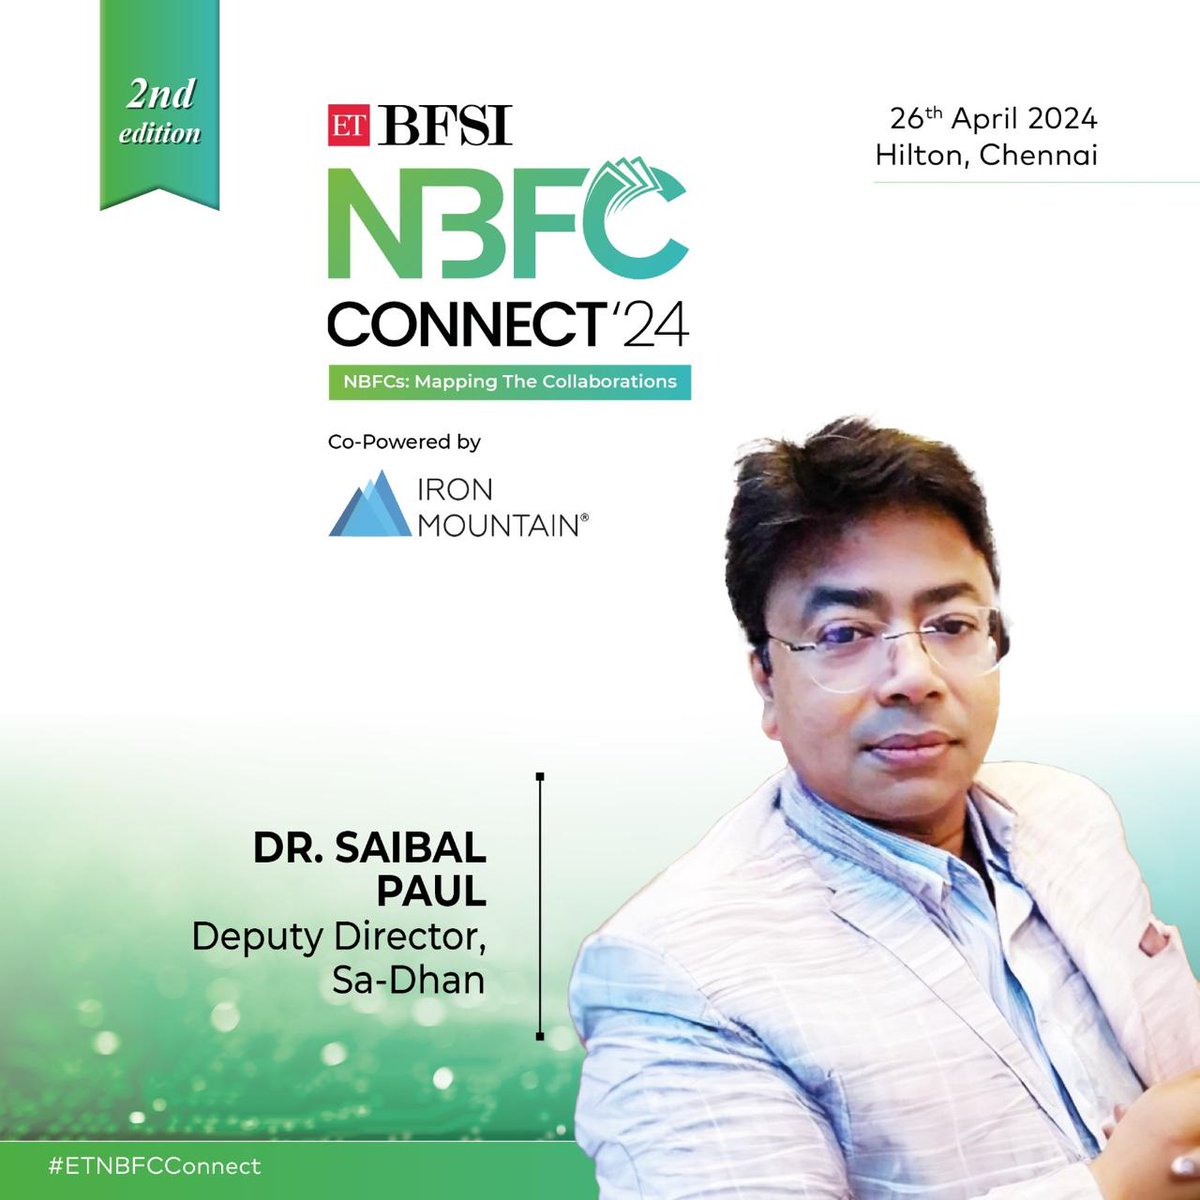 Excited to welcome Dr. Saibal Paul, Deputy Director at Sa-Dhan, as one of our esteemed speakers for the ETBFSI NBFC Connect 2024 in Chennai on April 26th! Know more- zurl.co/uyu6 #ETBFSI #ETNBFCConnect #Chennai2024 #BFSIEvent #FinanceInnovation #Finance #NBFCs